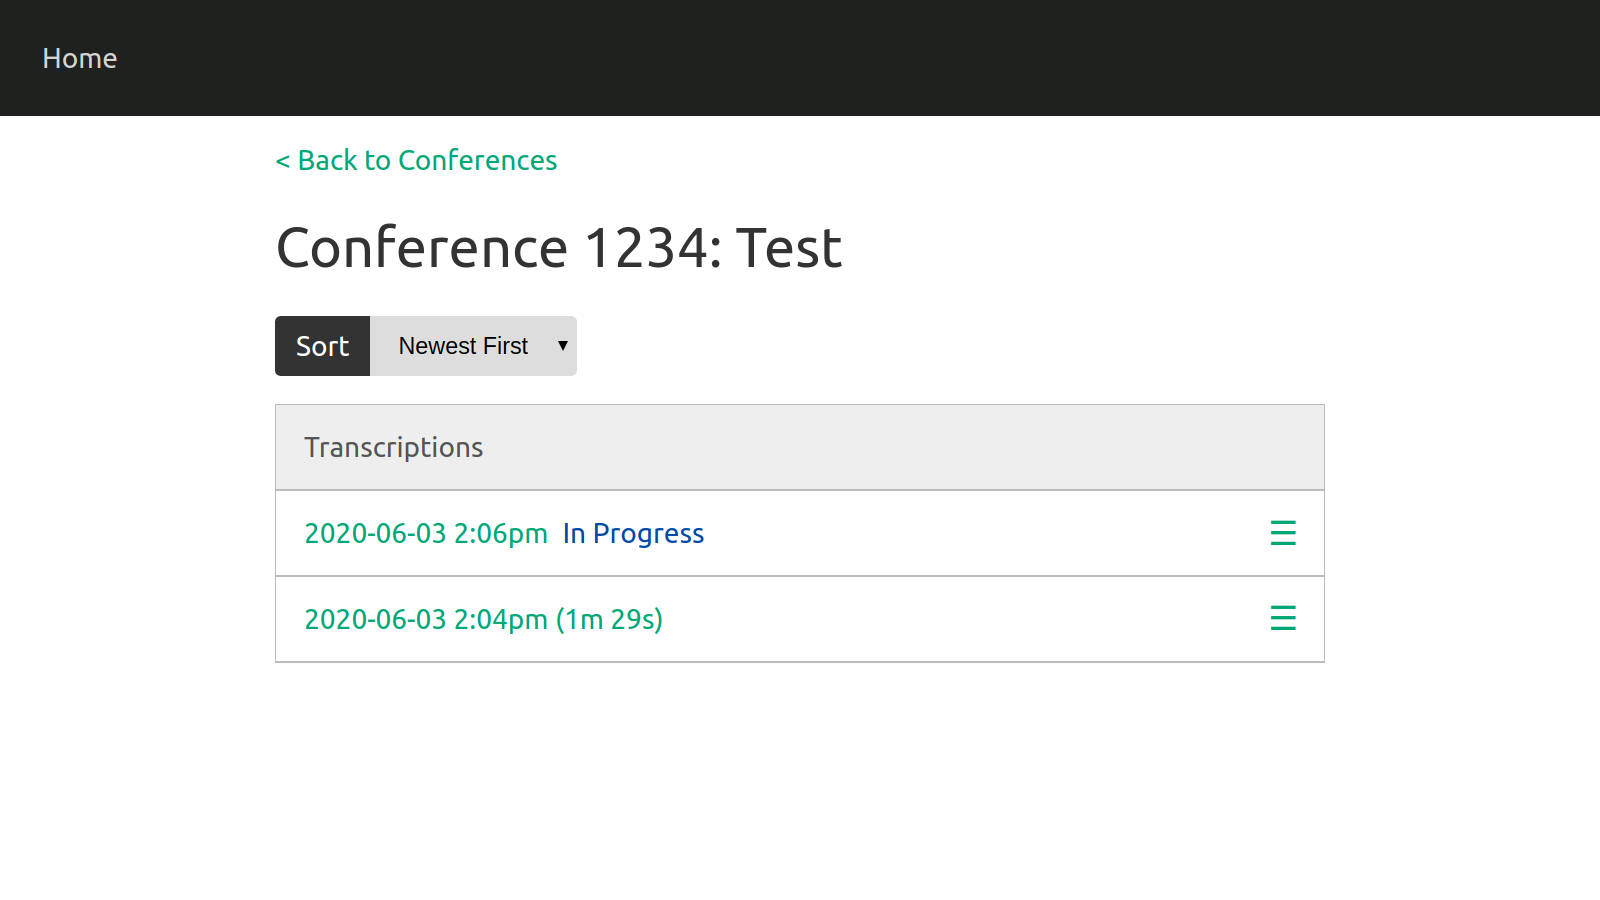 Screenshot of a full stack application that manages conference bridges and call transcriptions, built by James Nuanez.